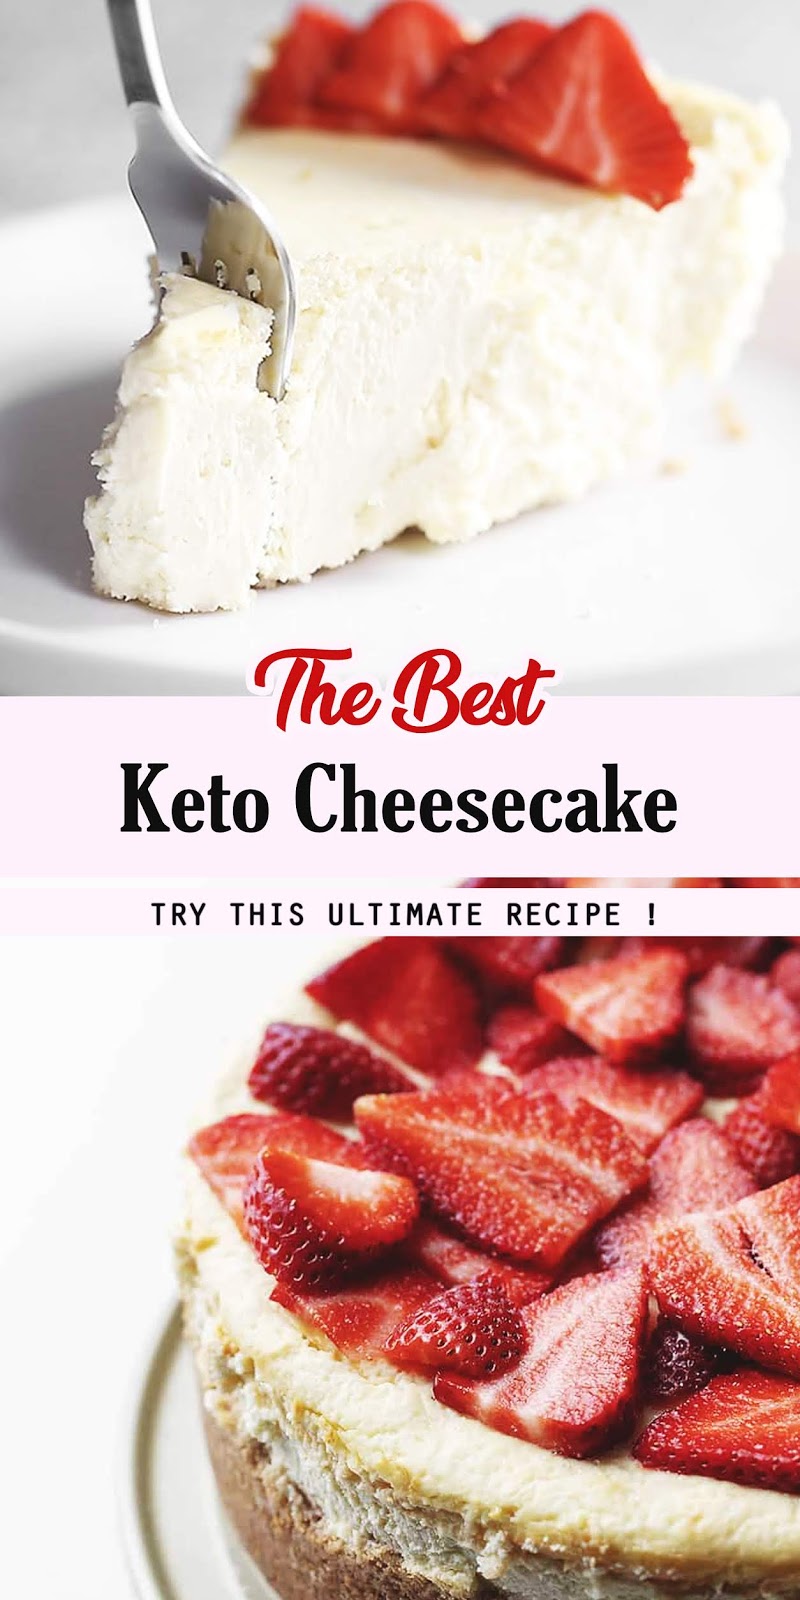 The Best Keto Cheesecake - 3 SECONDS